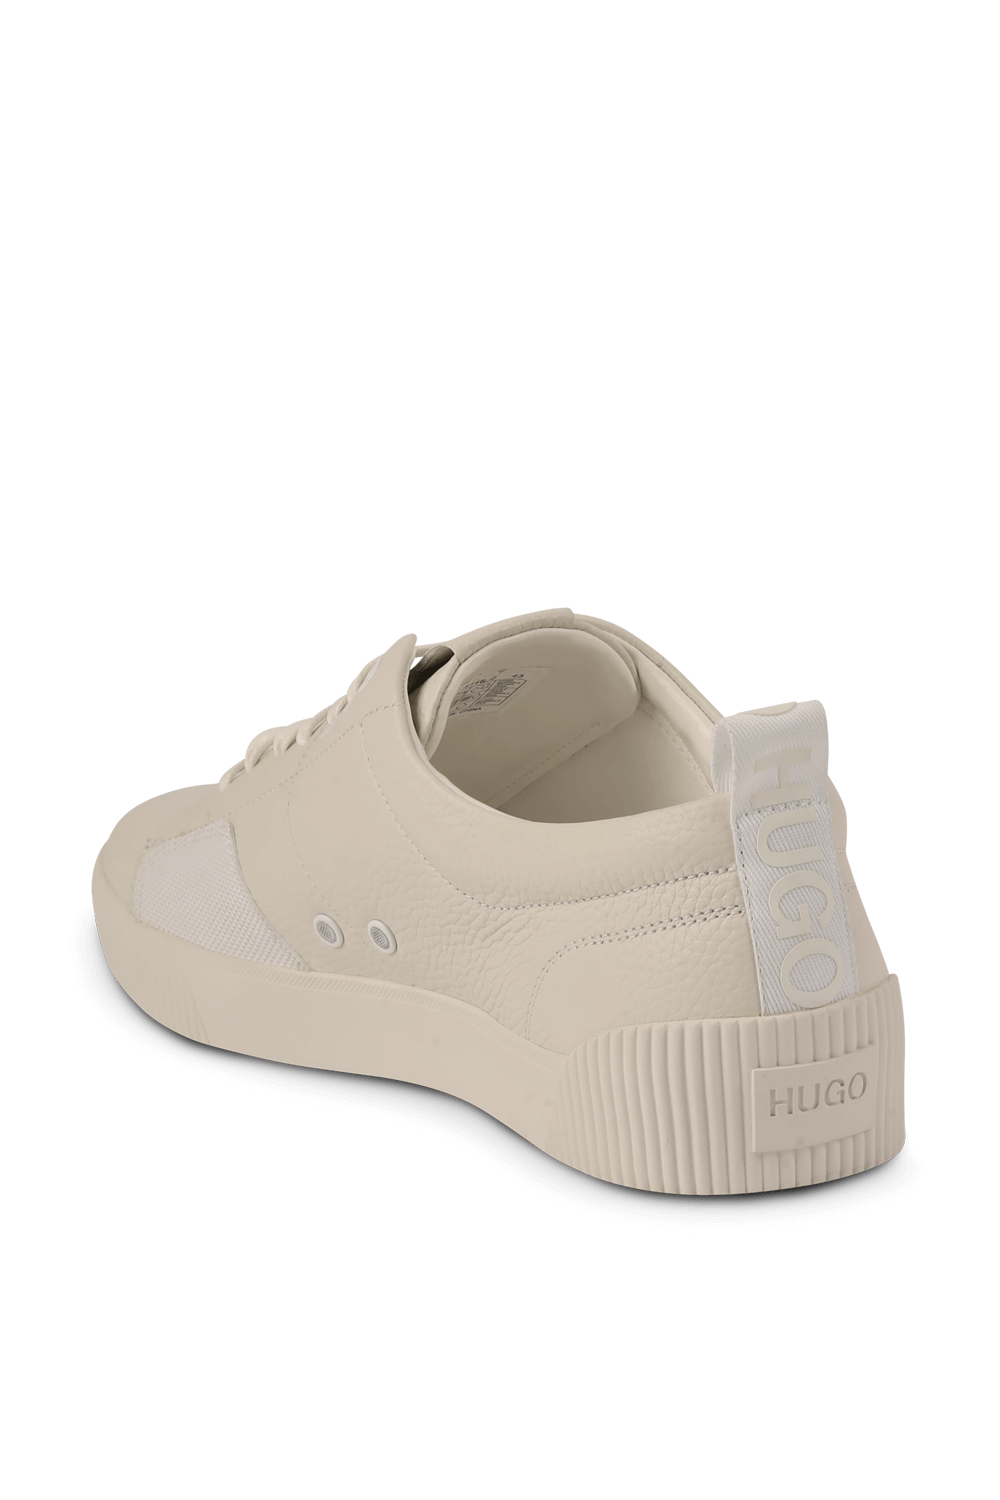 Classic Leather Sneakers in White HUGO